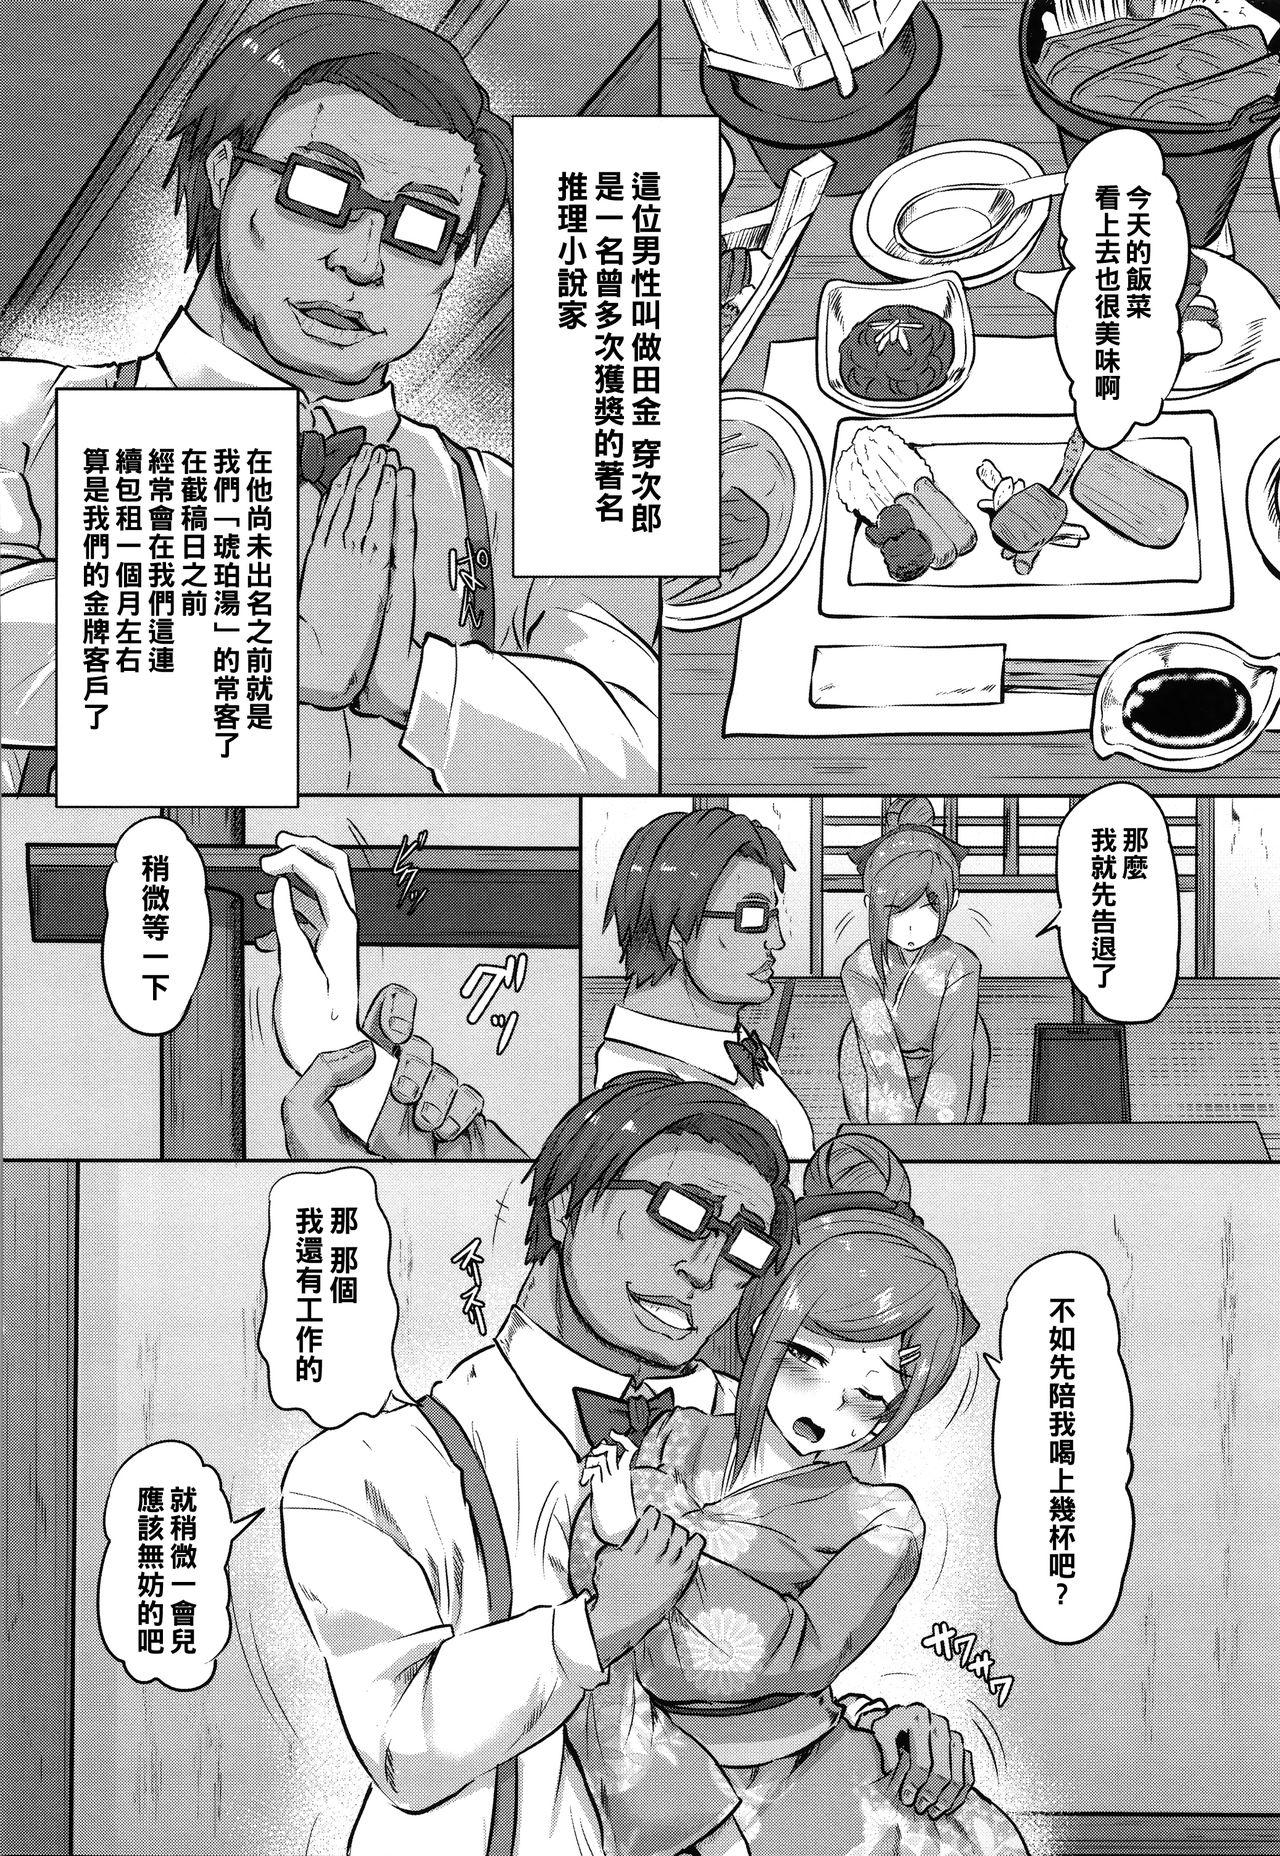 Fodendo 陵辱温泉—女将脅迫—（Chinese） Awesome - Page 2